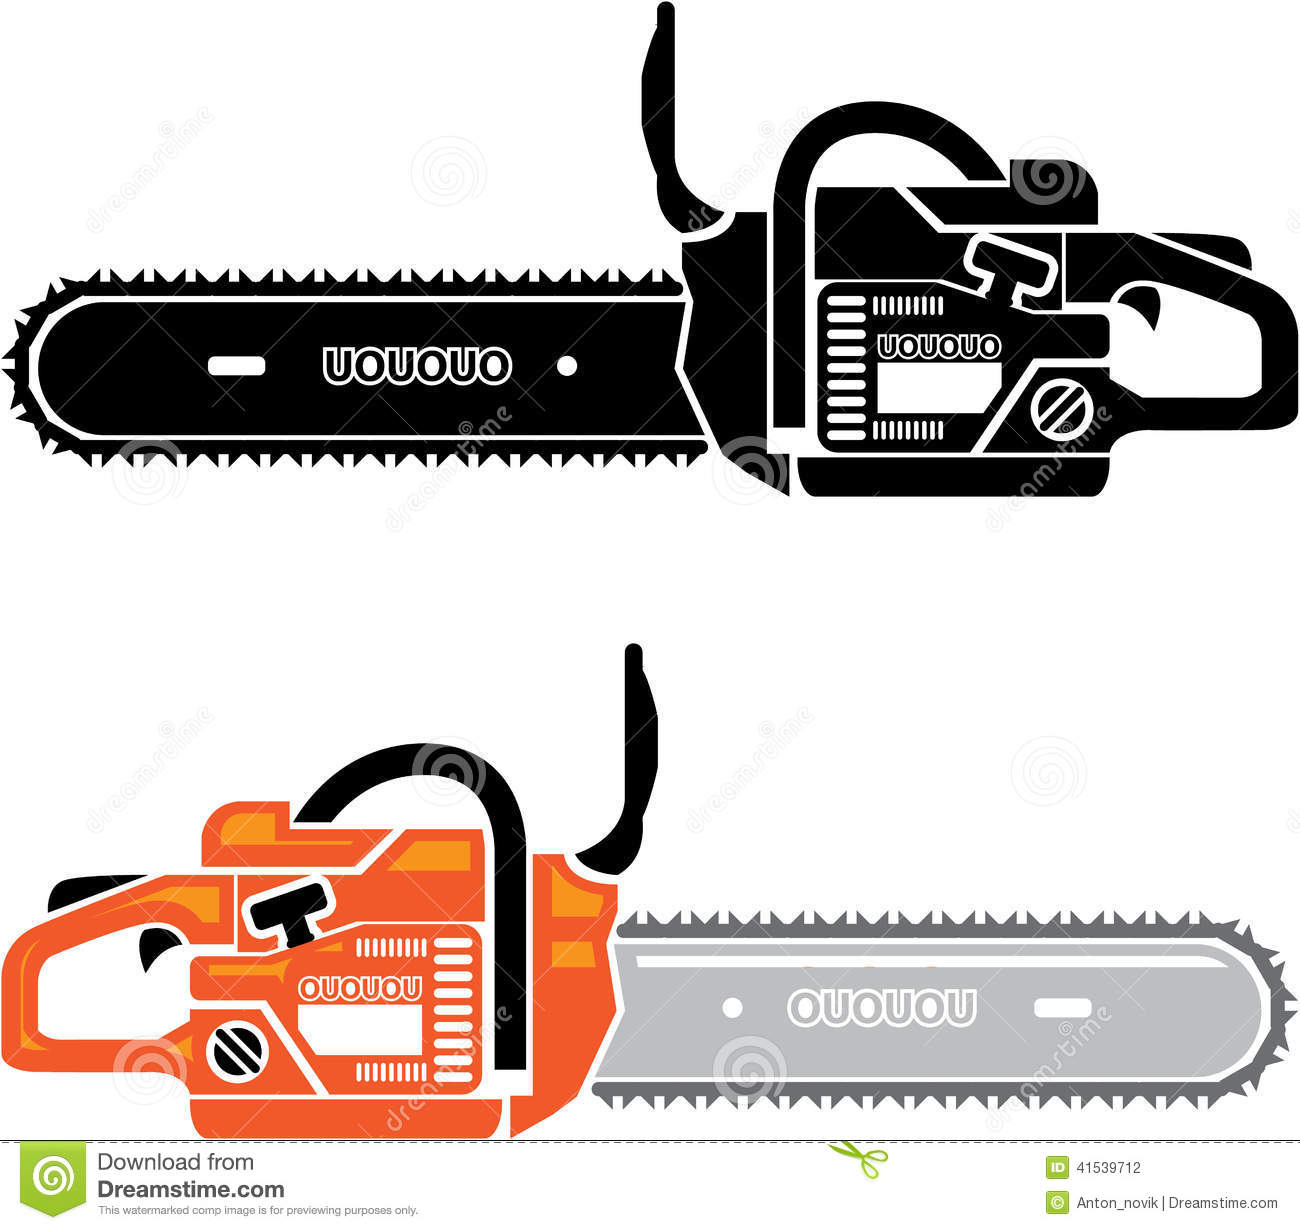 Chainsaw Illustration Stock Vector   Image  41539712